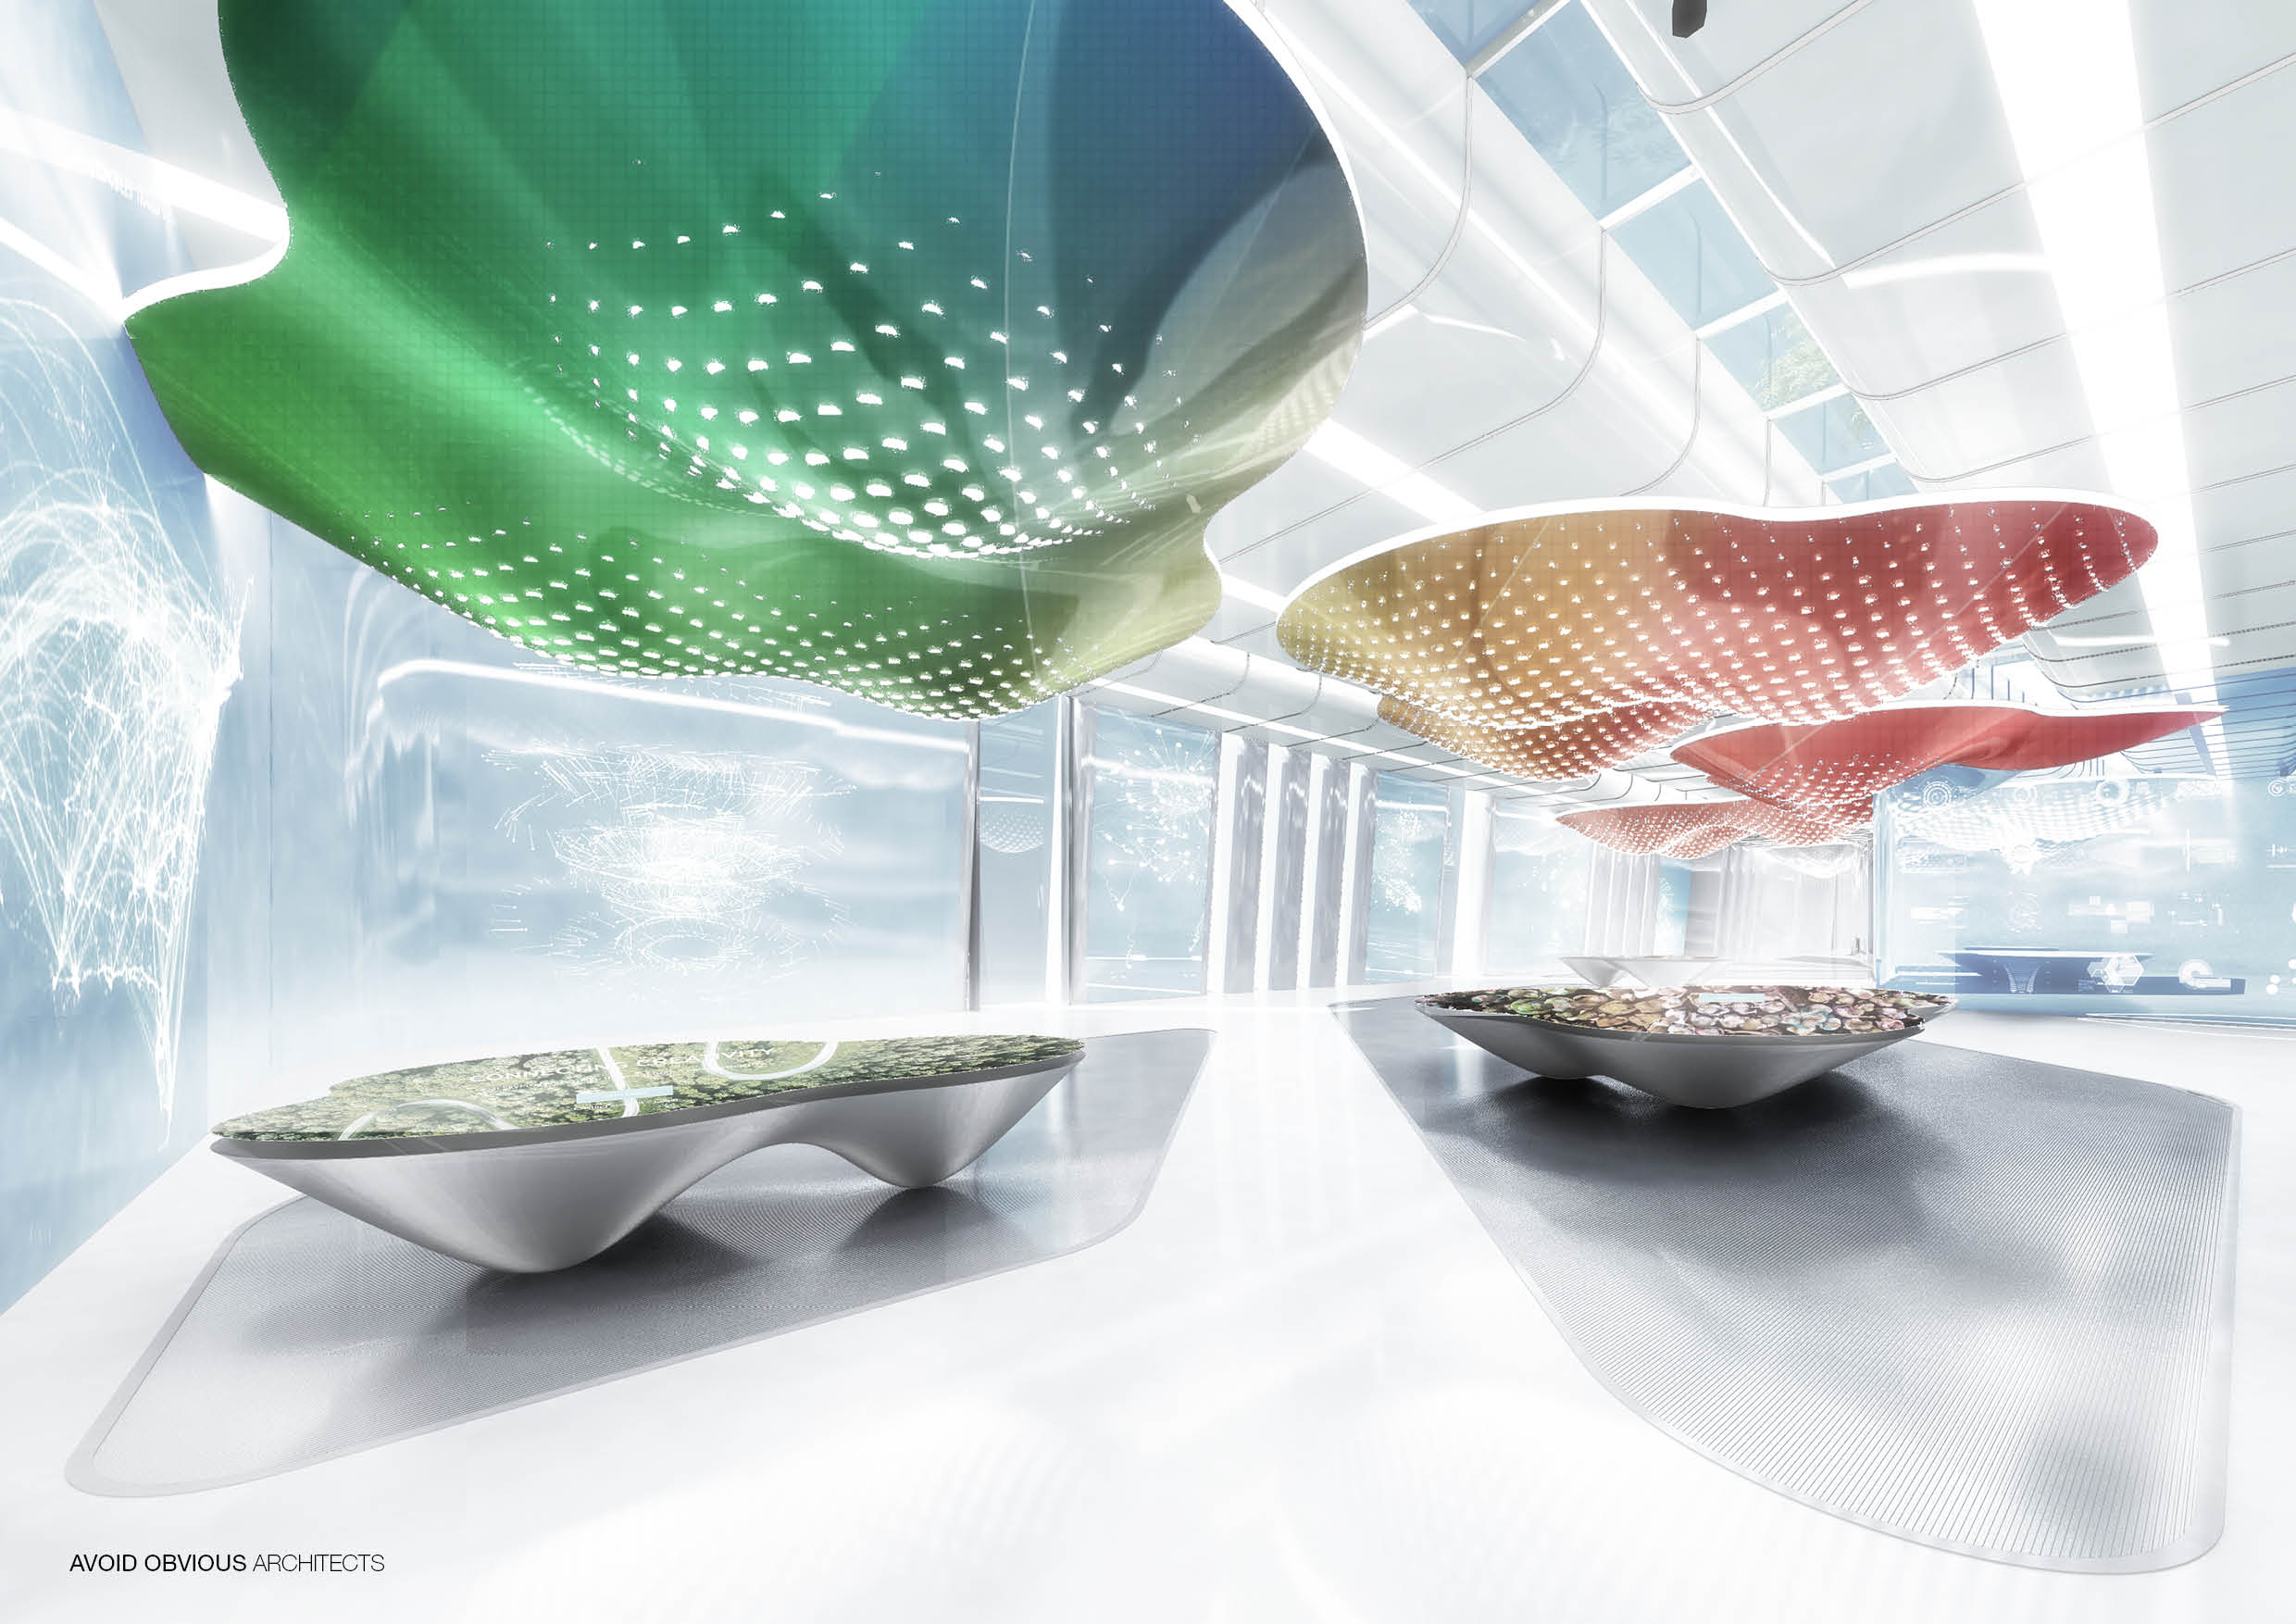 Office, Sustainable, customizable, flexible, workplace, future, architecture, interior, design, green, plants, indoors, avoid obvious, aoa, aoarchitect, aviation, air, flying, airline, lobby, exhibition, 2020, garden, fly